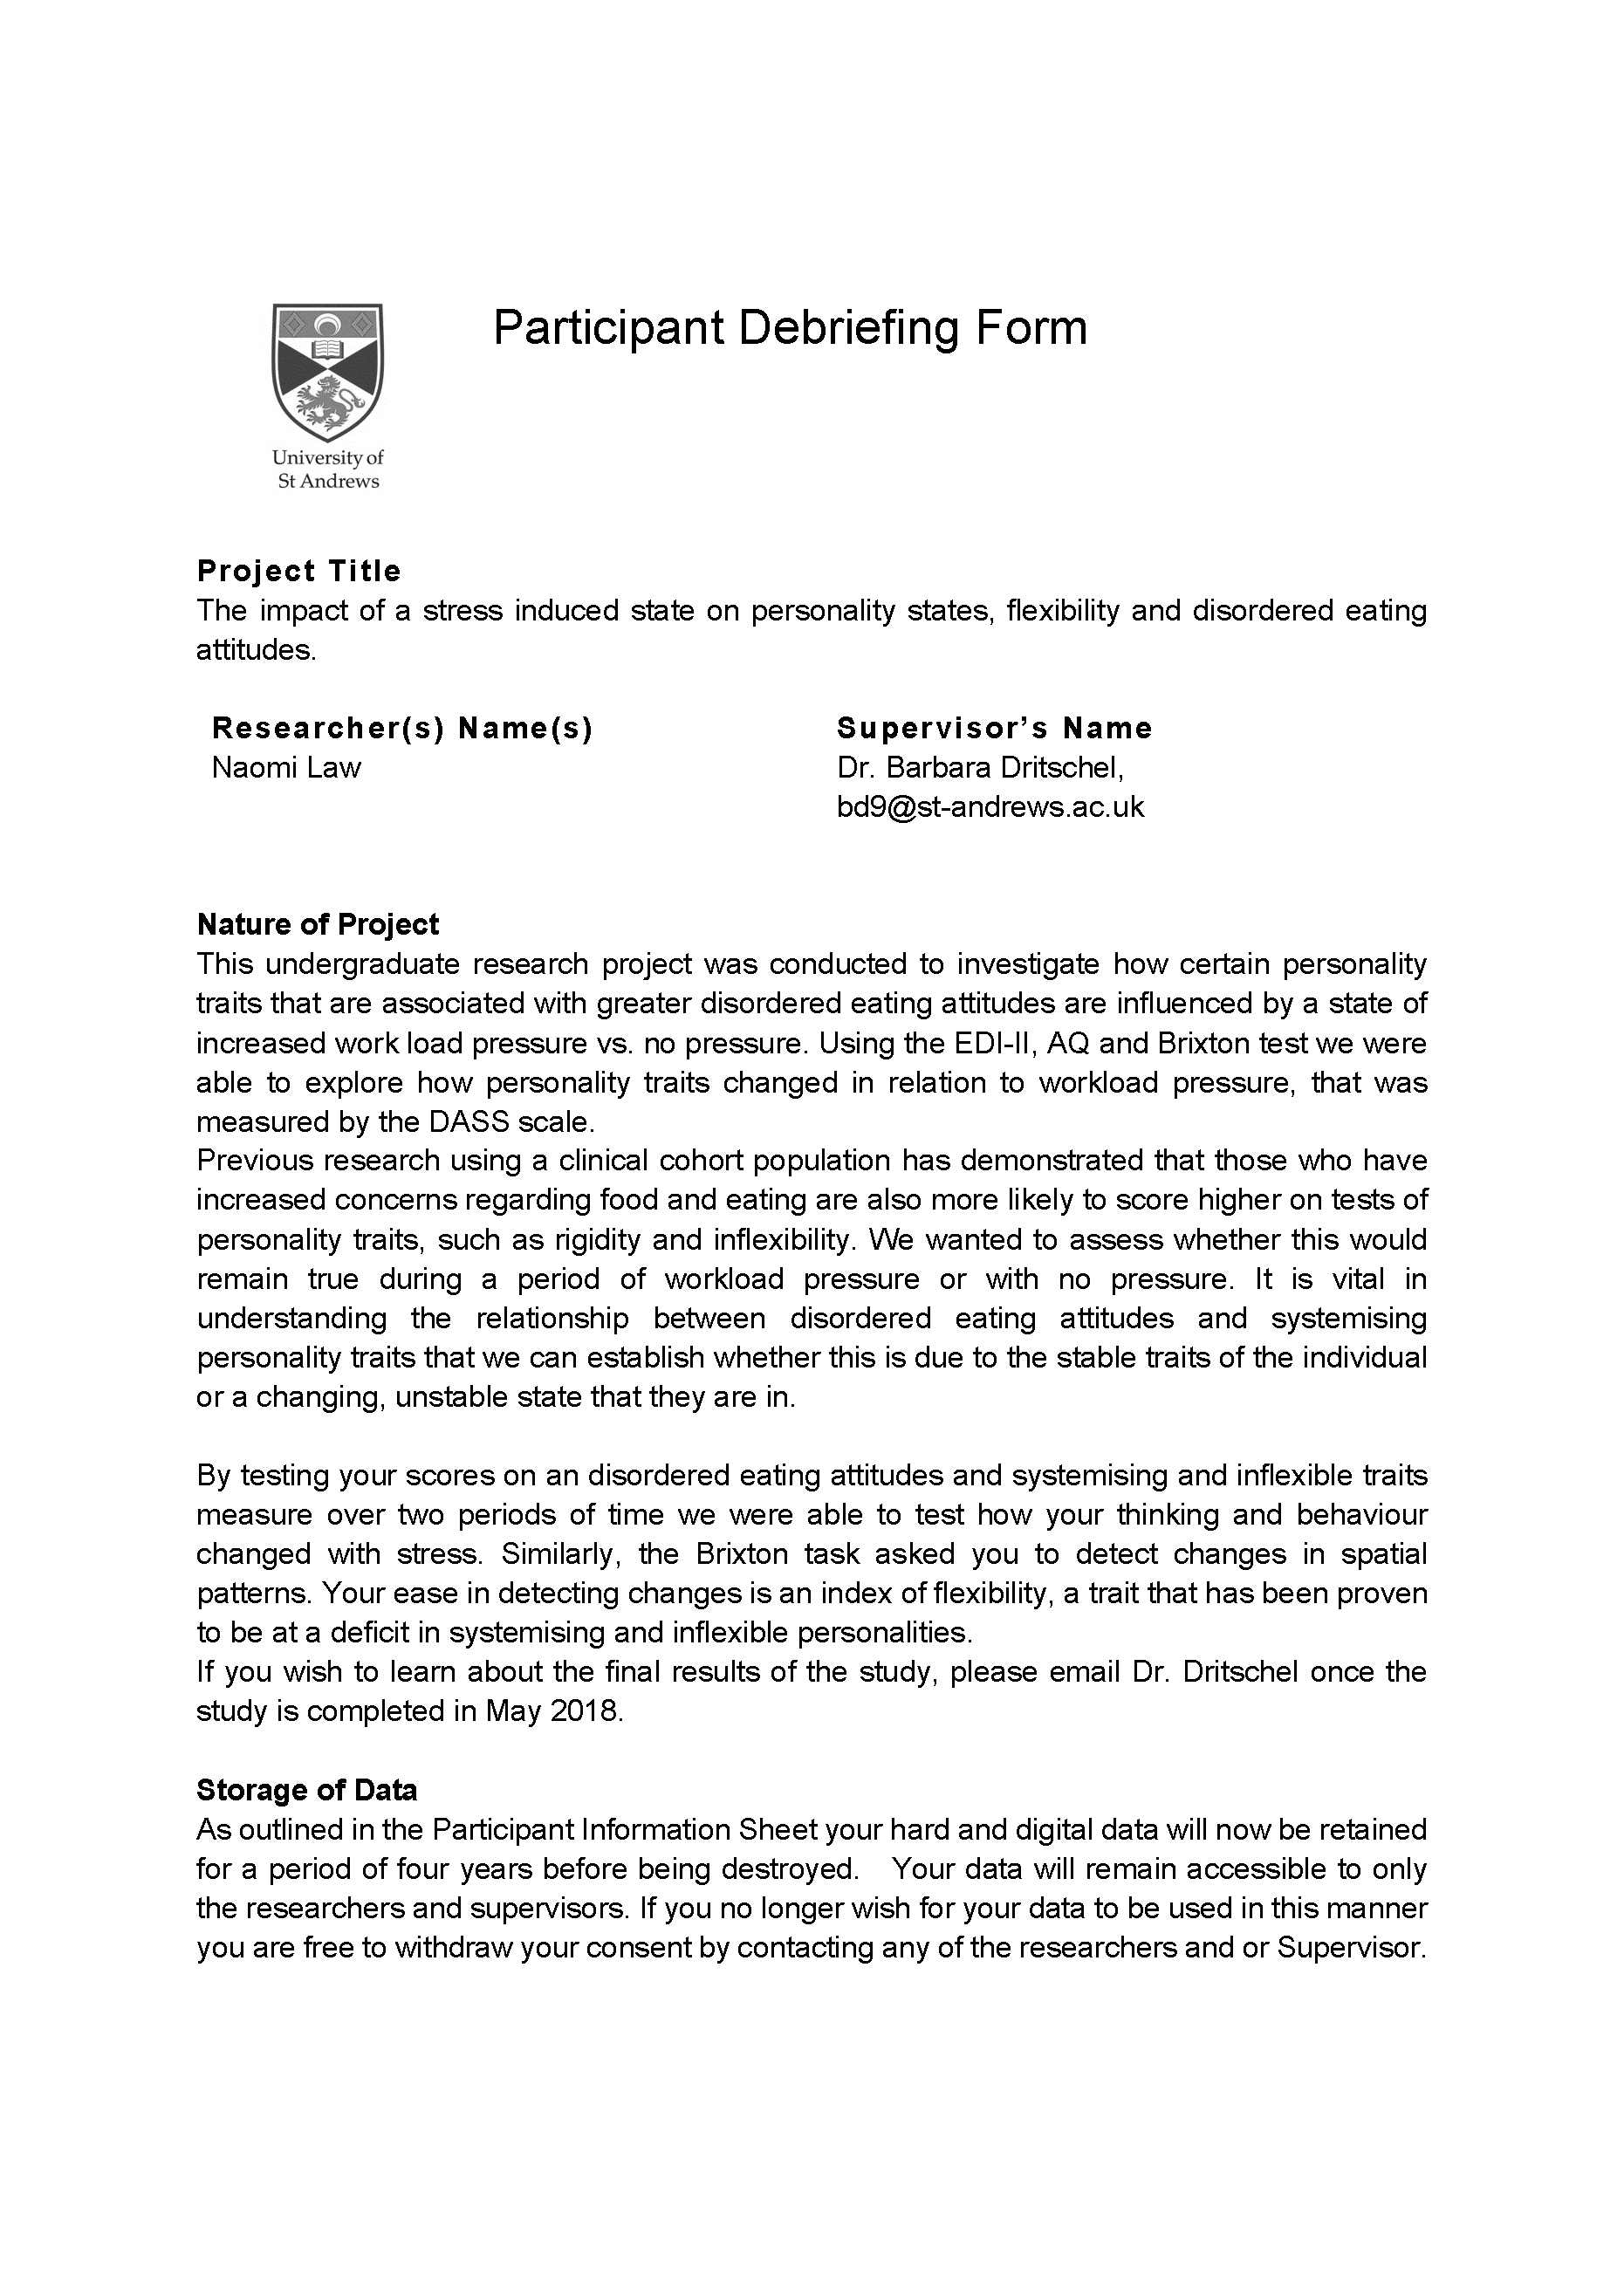 copy of the first page of a Participant Debriefing Form